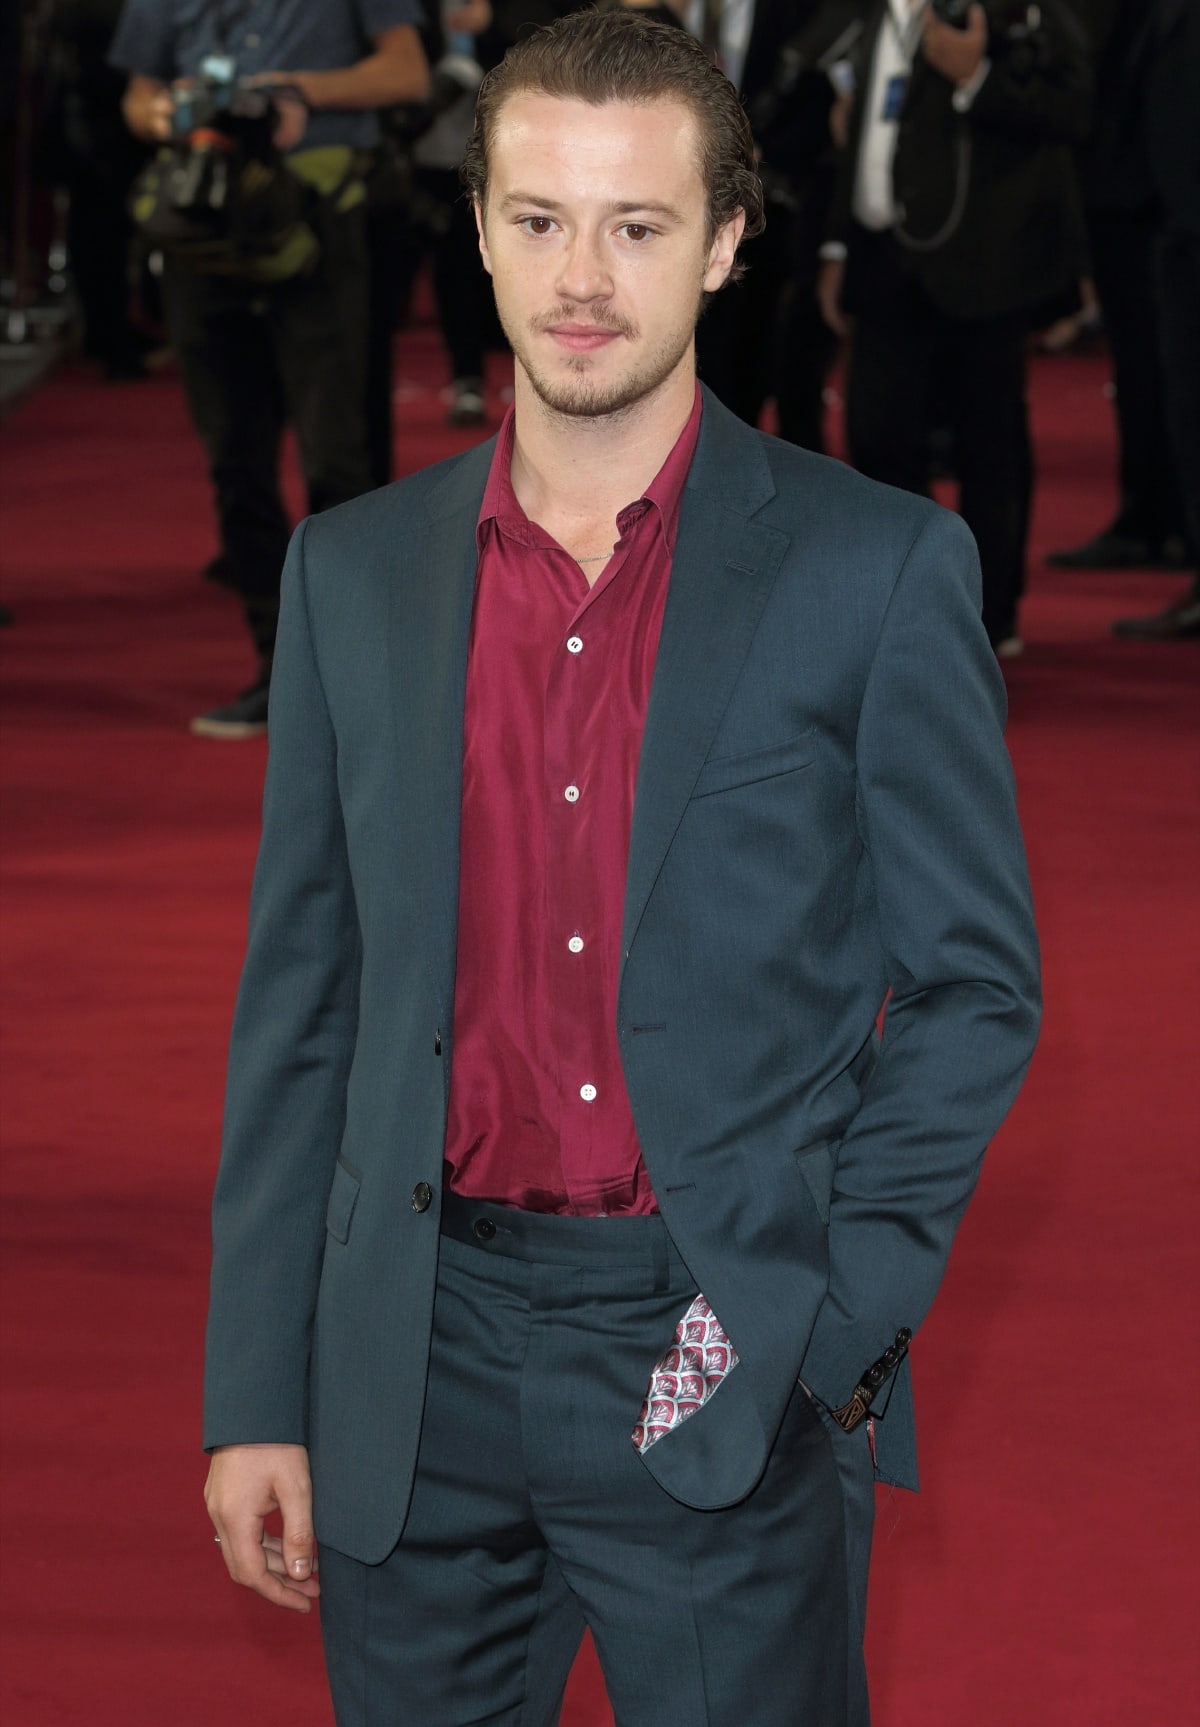 Joseph Quinn attending the premiere of Catherine the Great